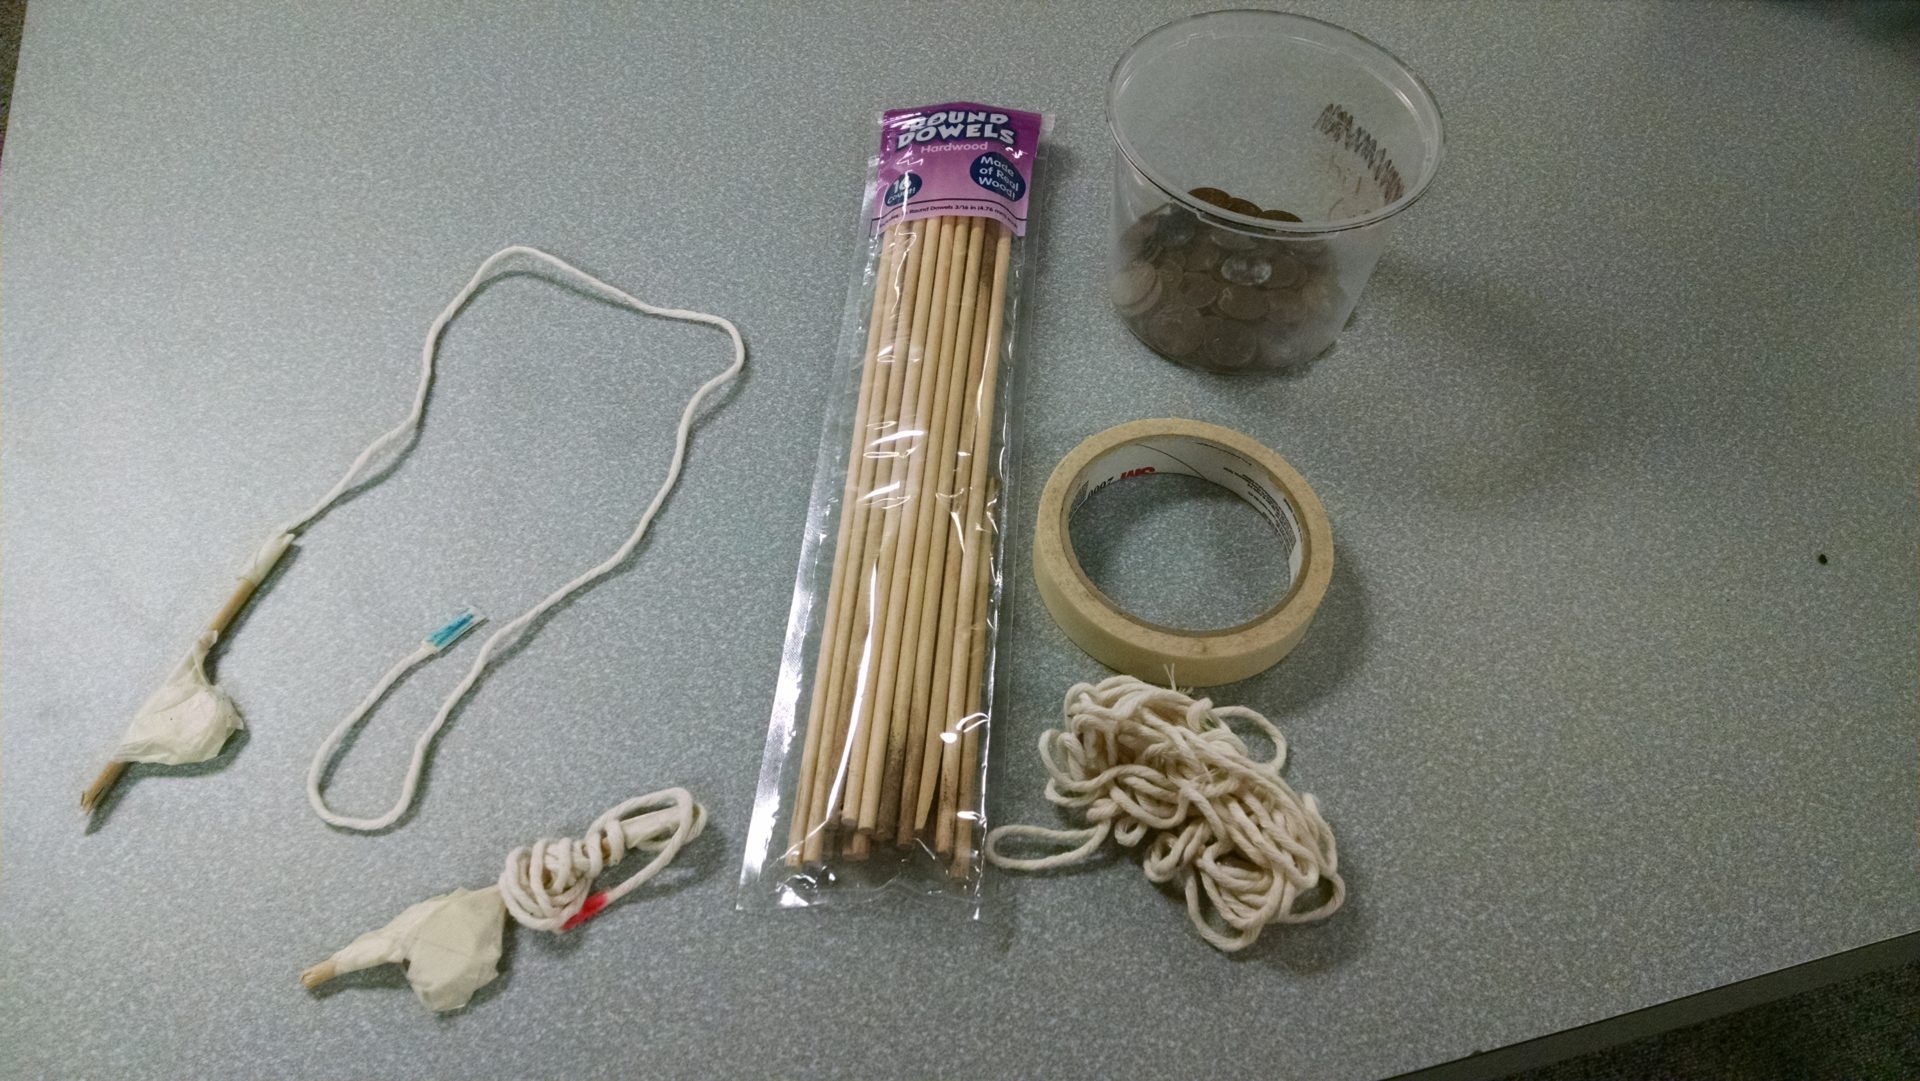 Twine, wooden dowel, masking tape, and pennies.